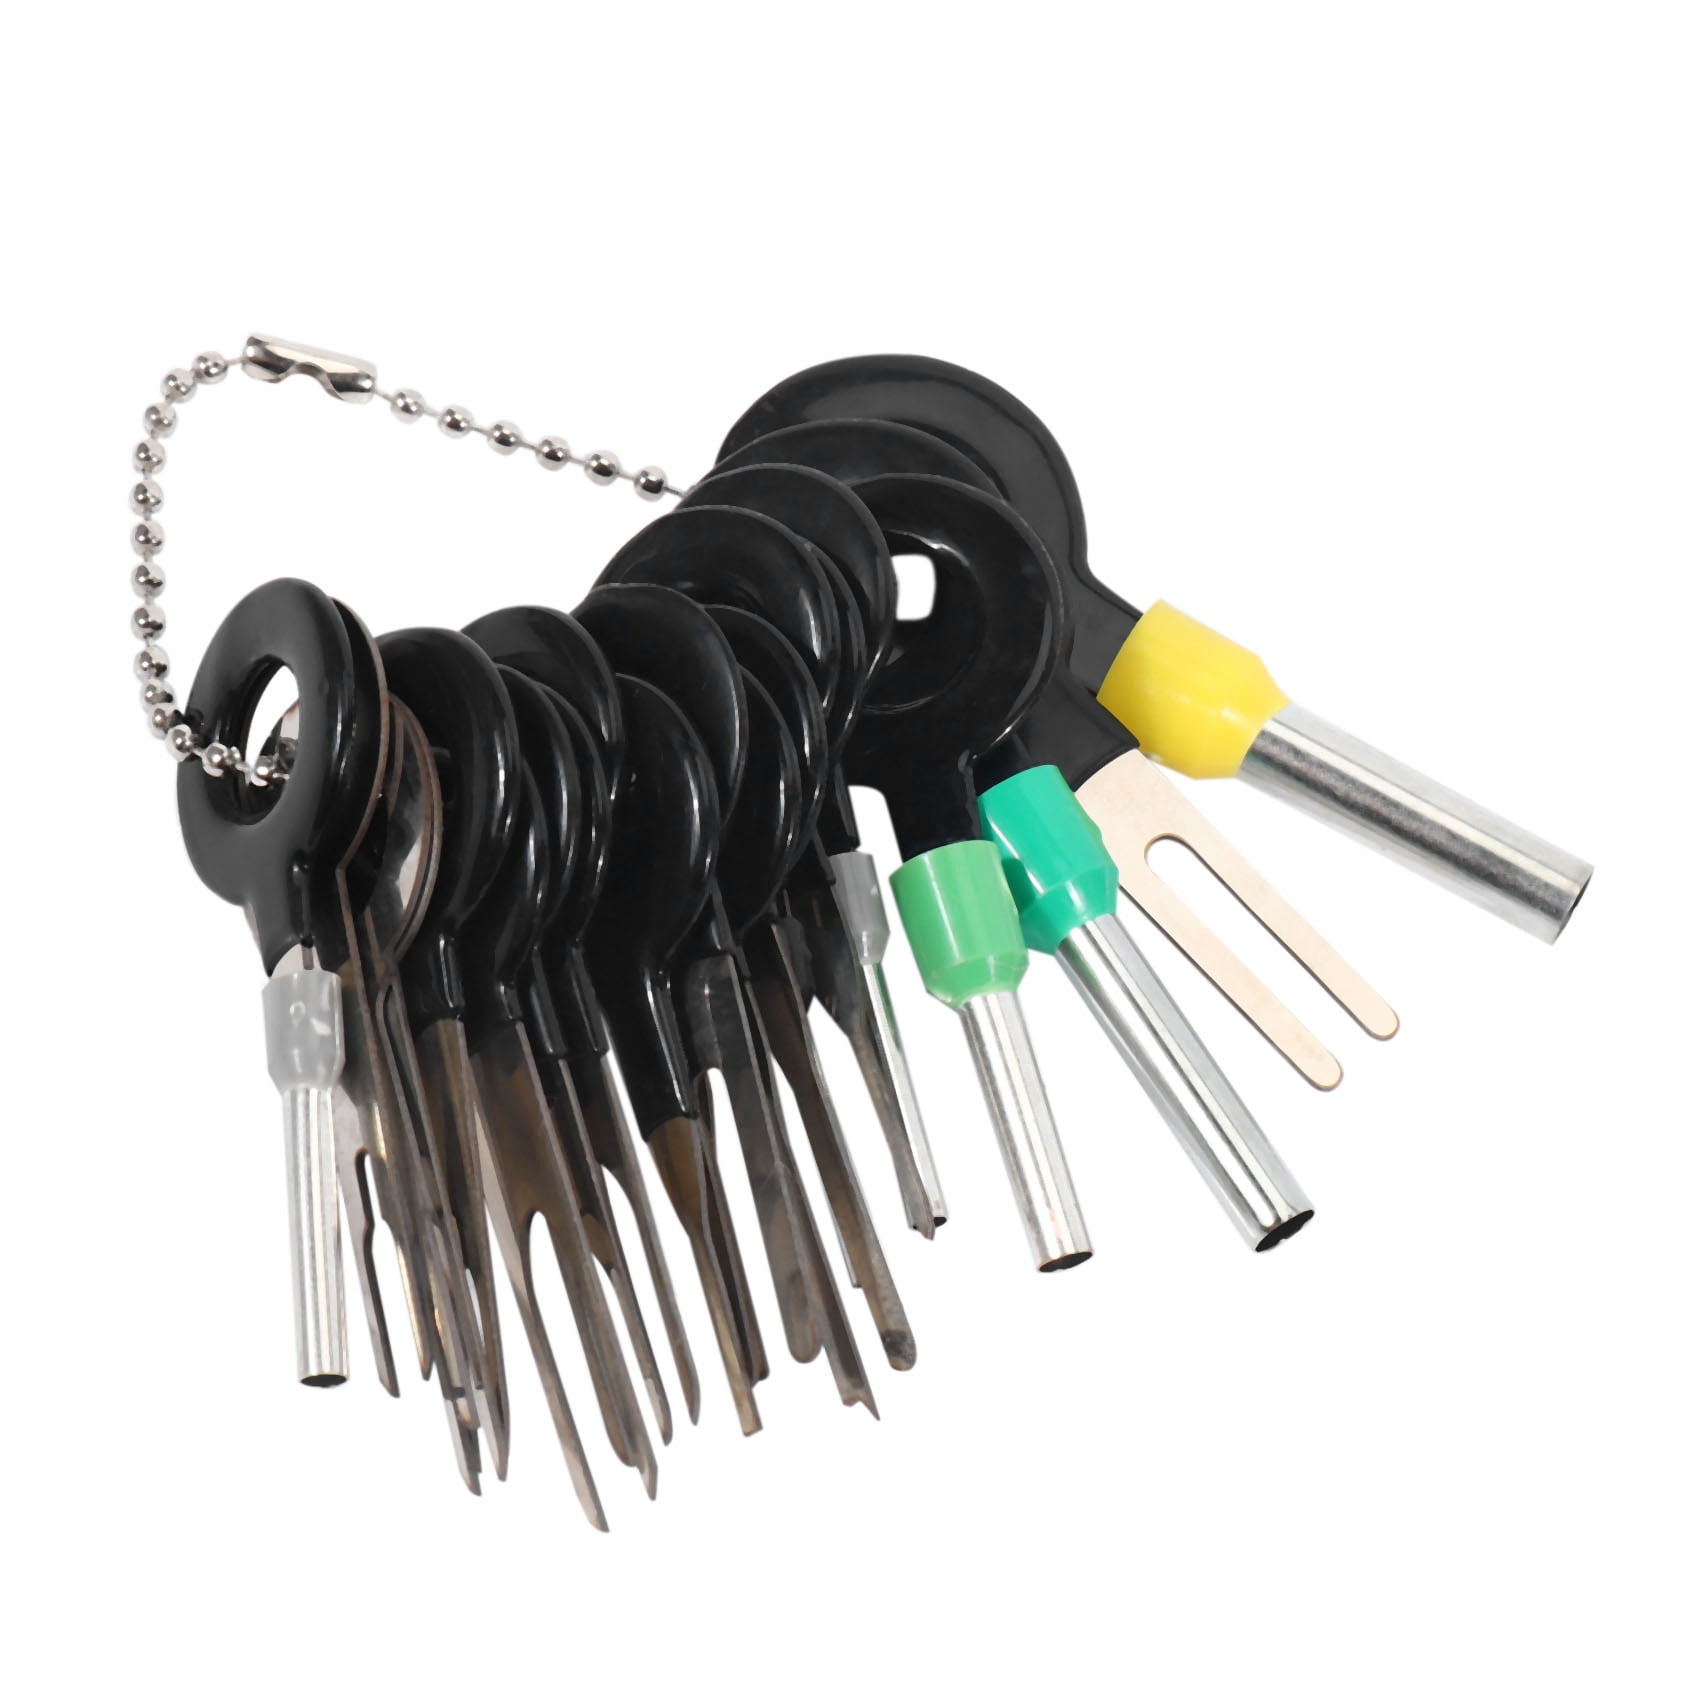 Back Needle Removal Tool with a Protective Bag Terminal Removal Tool Kit Electrical Wiring Crimp Puller Repair Key Removal Tools 82Pcs Wire Connector Terminal Pin Extractors 